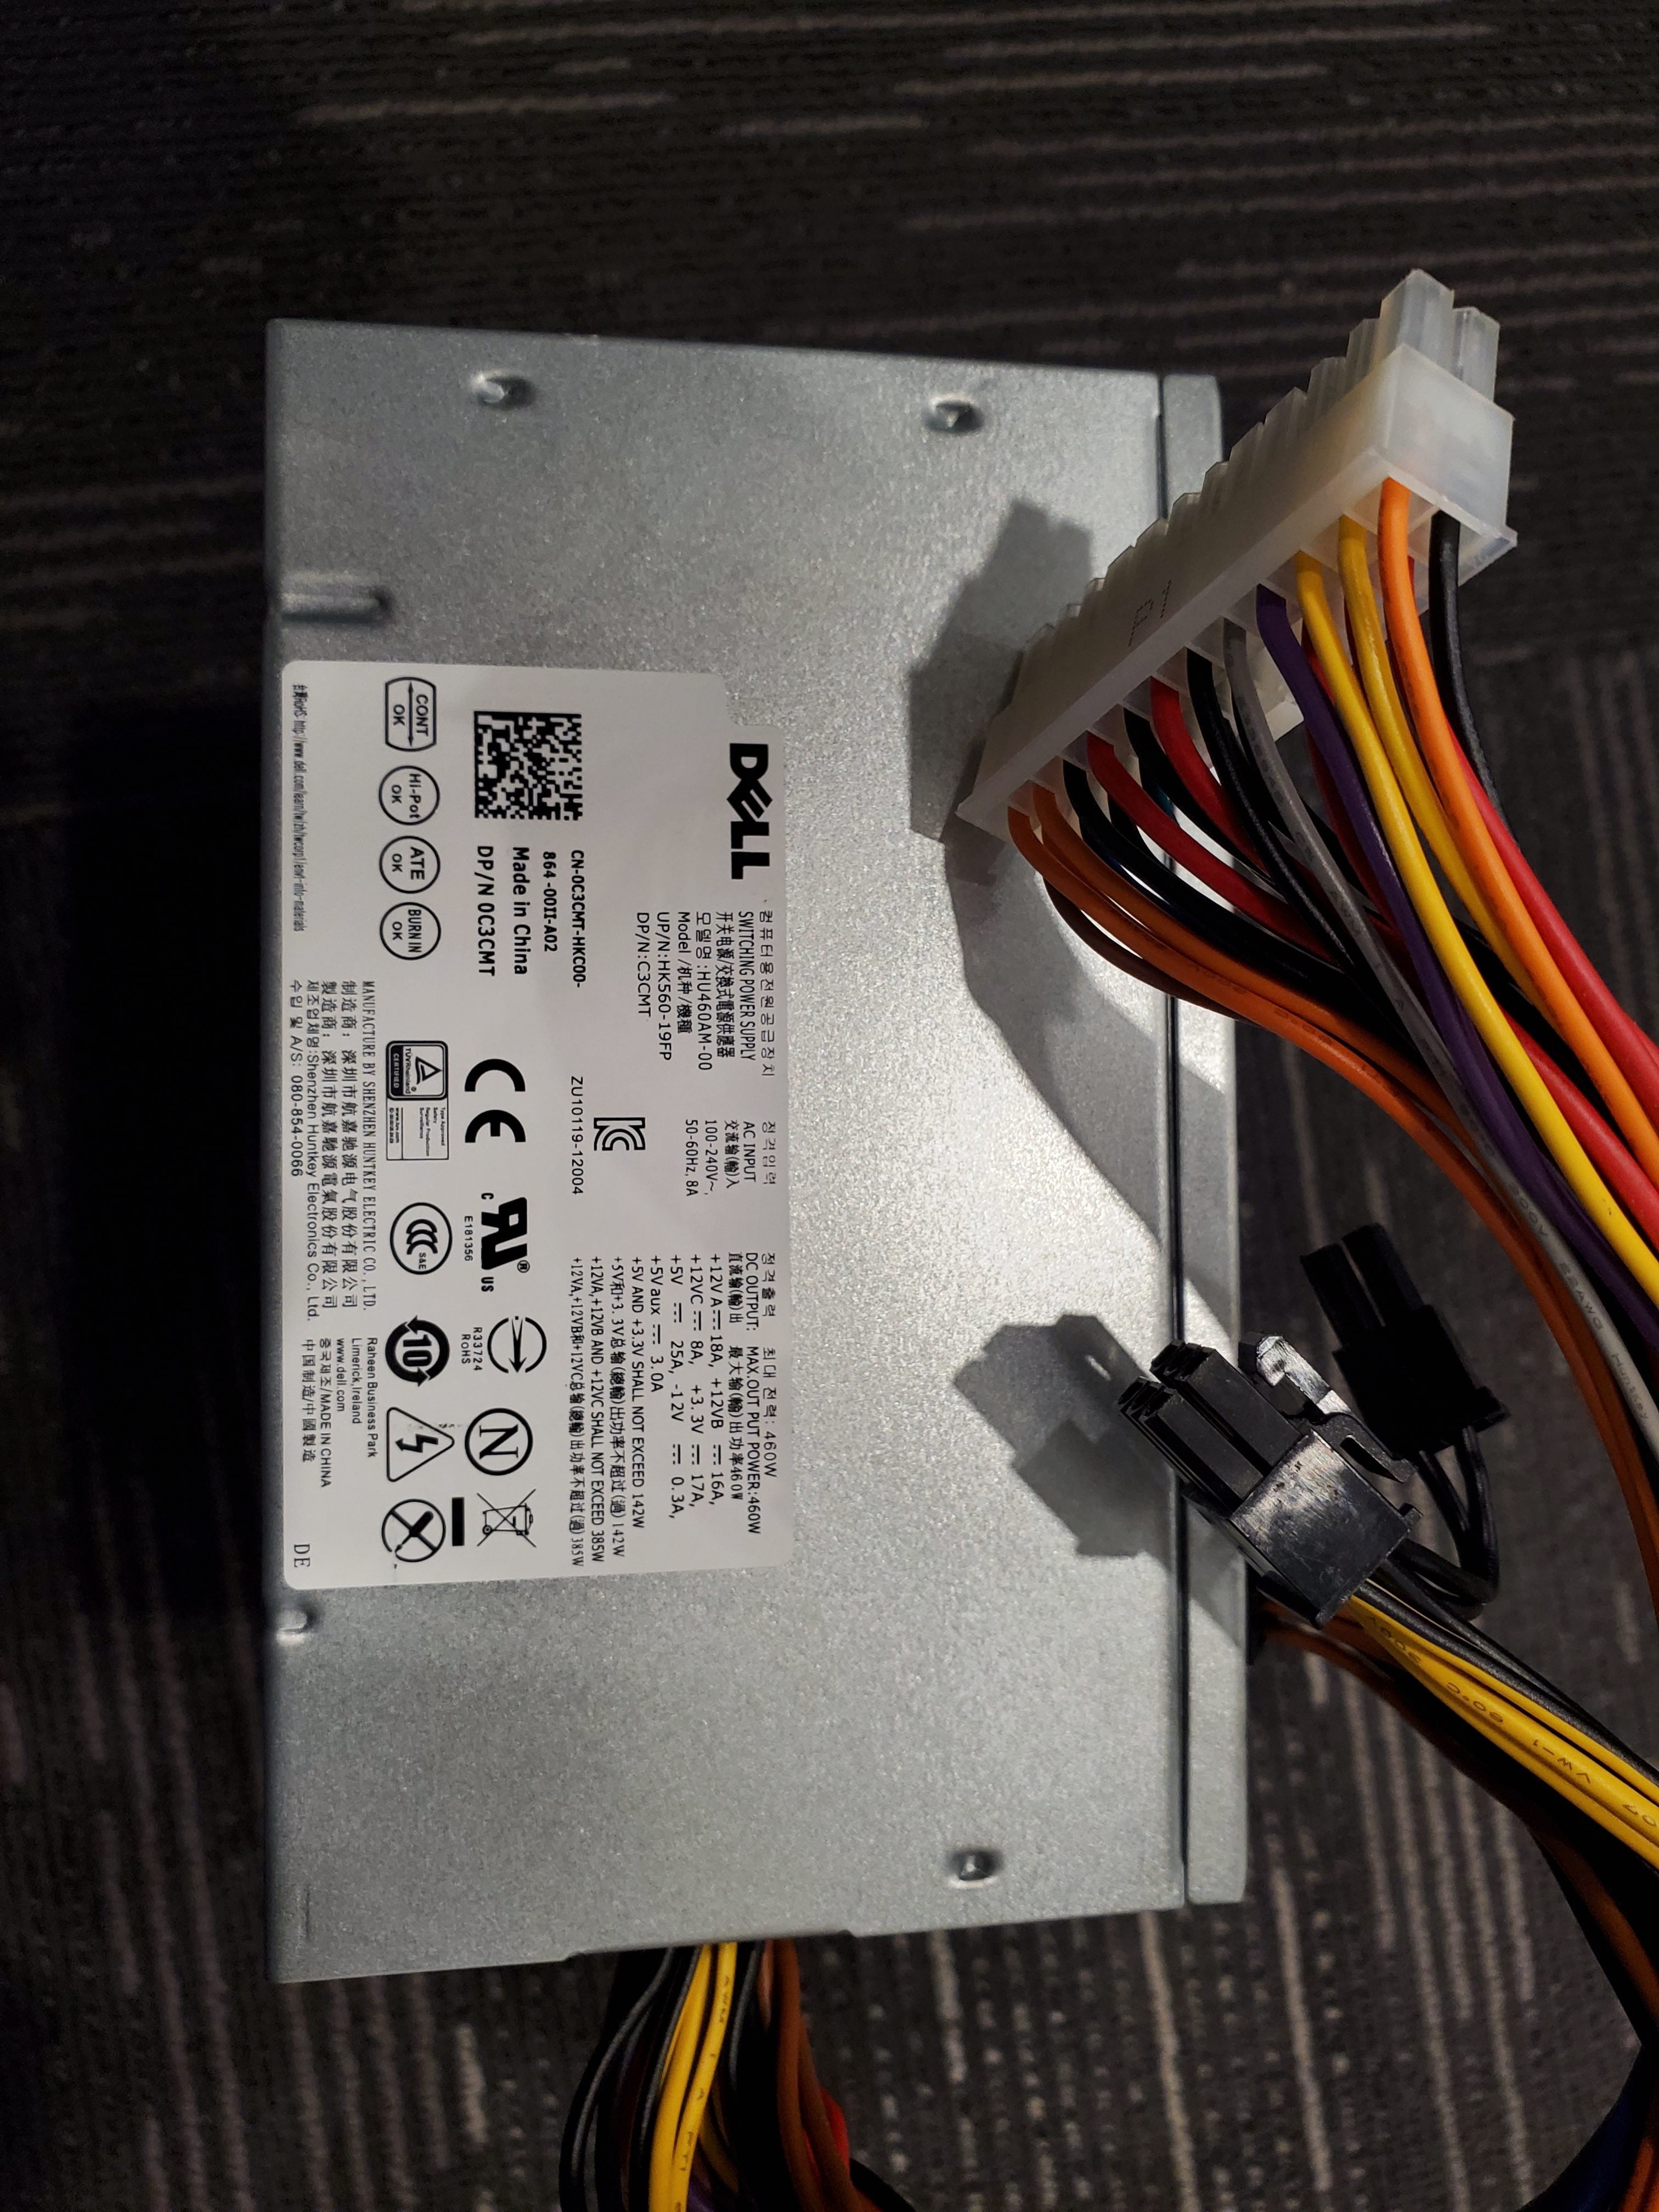 Dell Psu 460w New From Alienware Graphics Amplifier Free For Sale Redflagdeals Com Forums